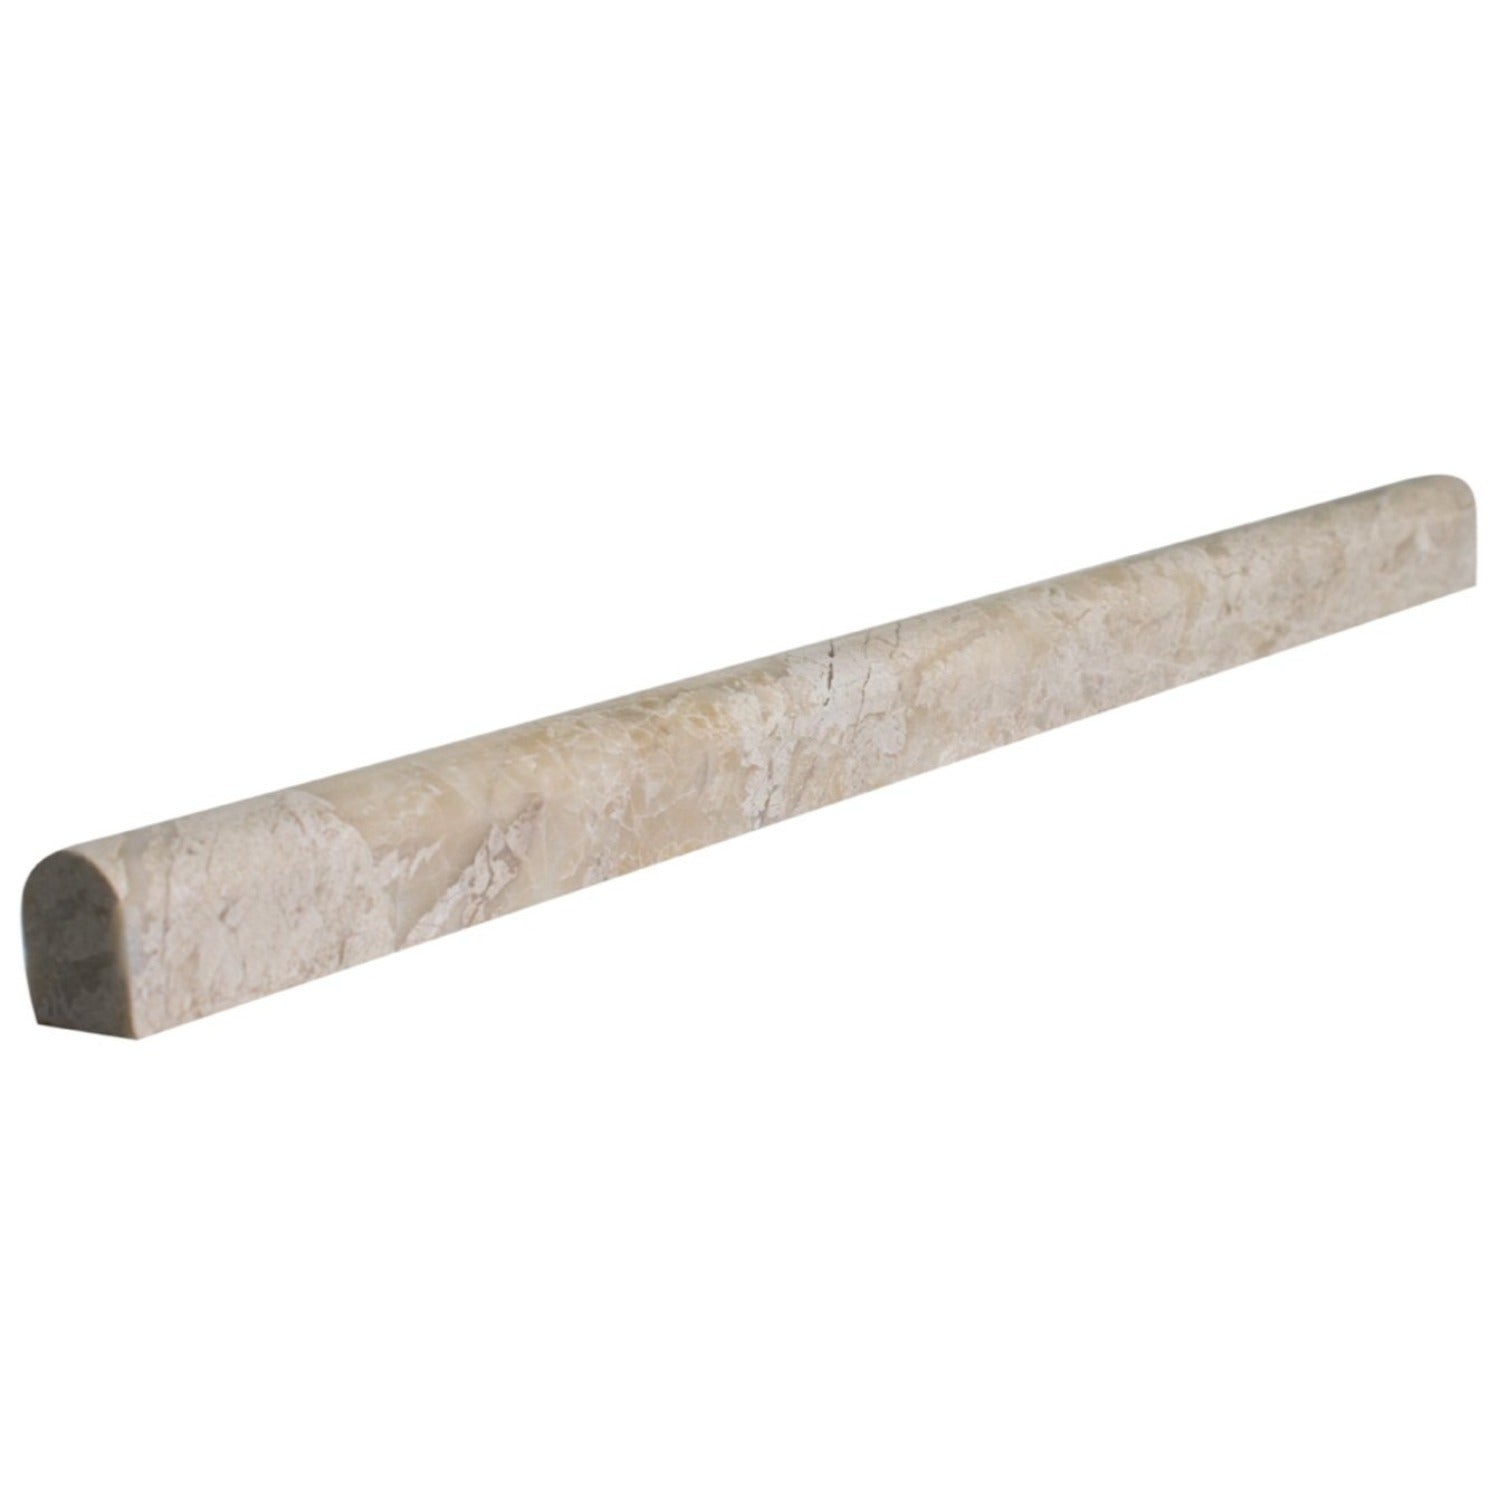 Crema Marfil Honed Marble 1/2x12 Pencil Moulding All Marble Tiles